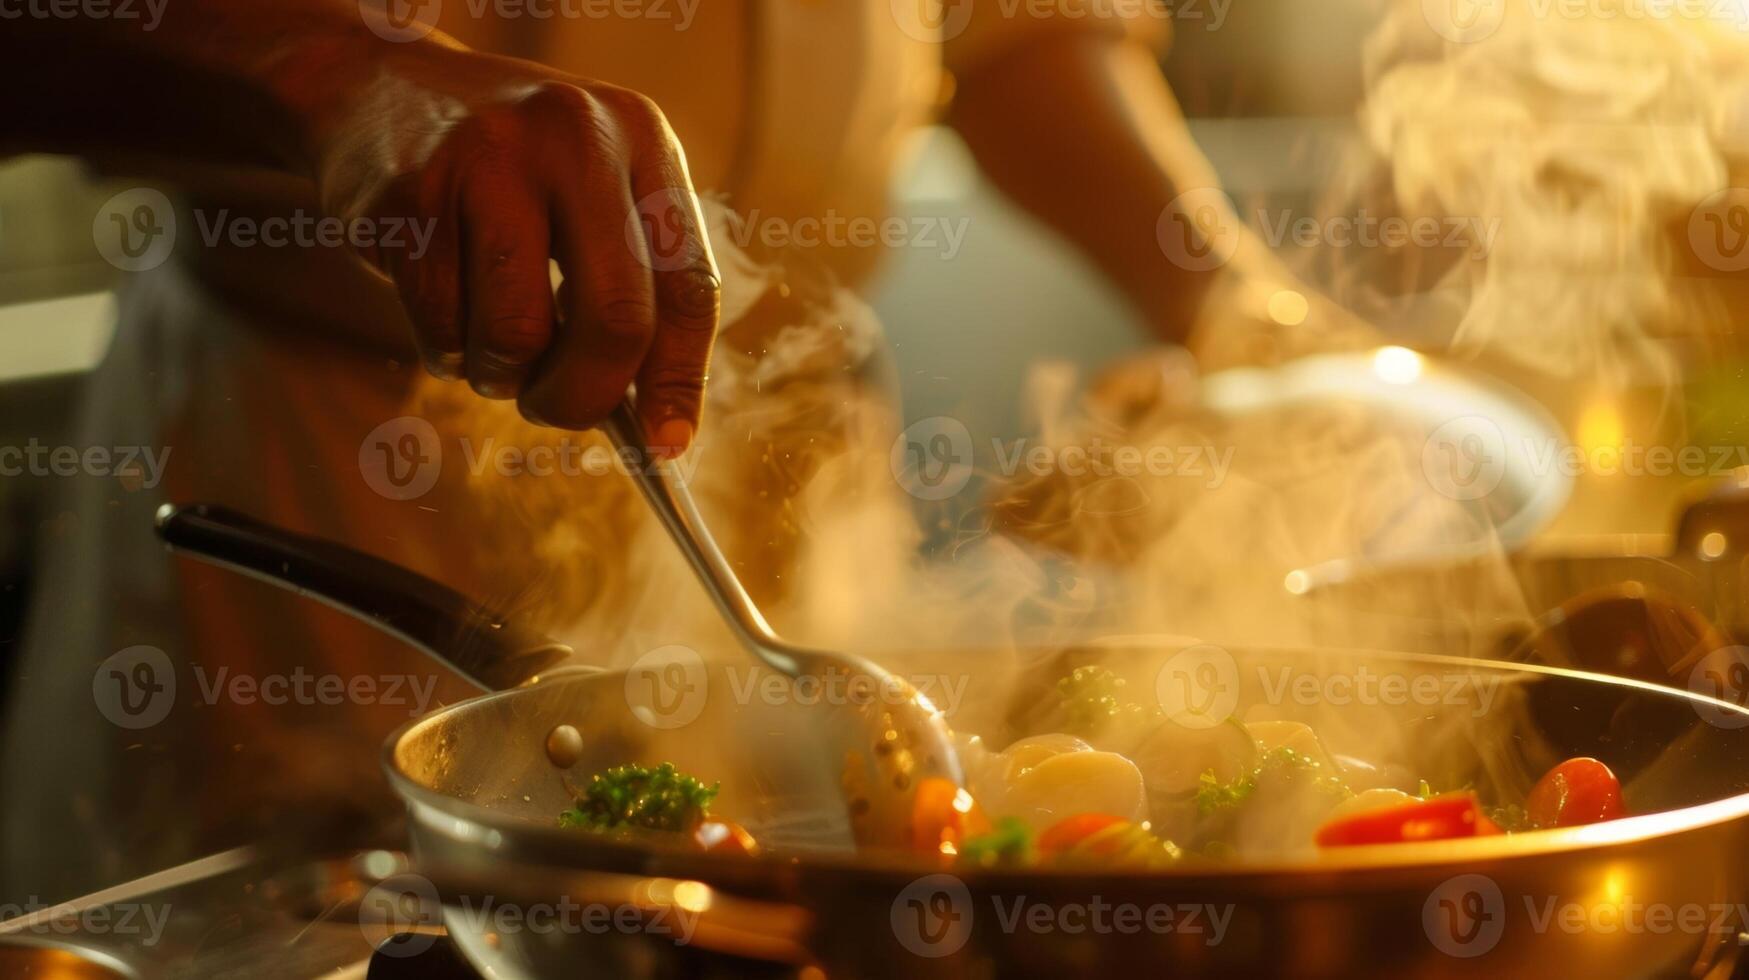 A man cooks a gourmet meal for his partner challenging the idea that cooking is traditionally a feminine activity photo